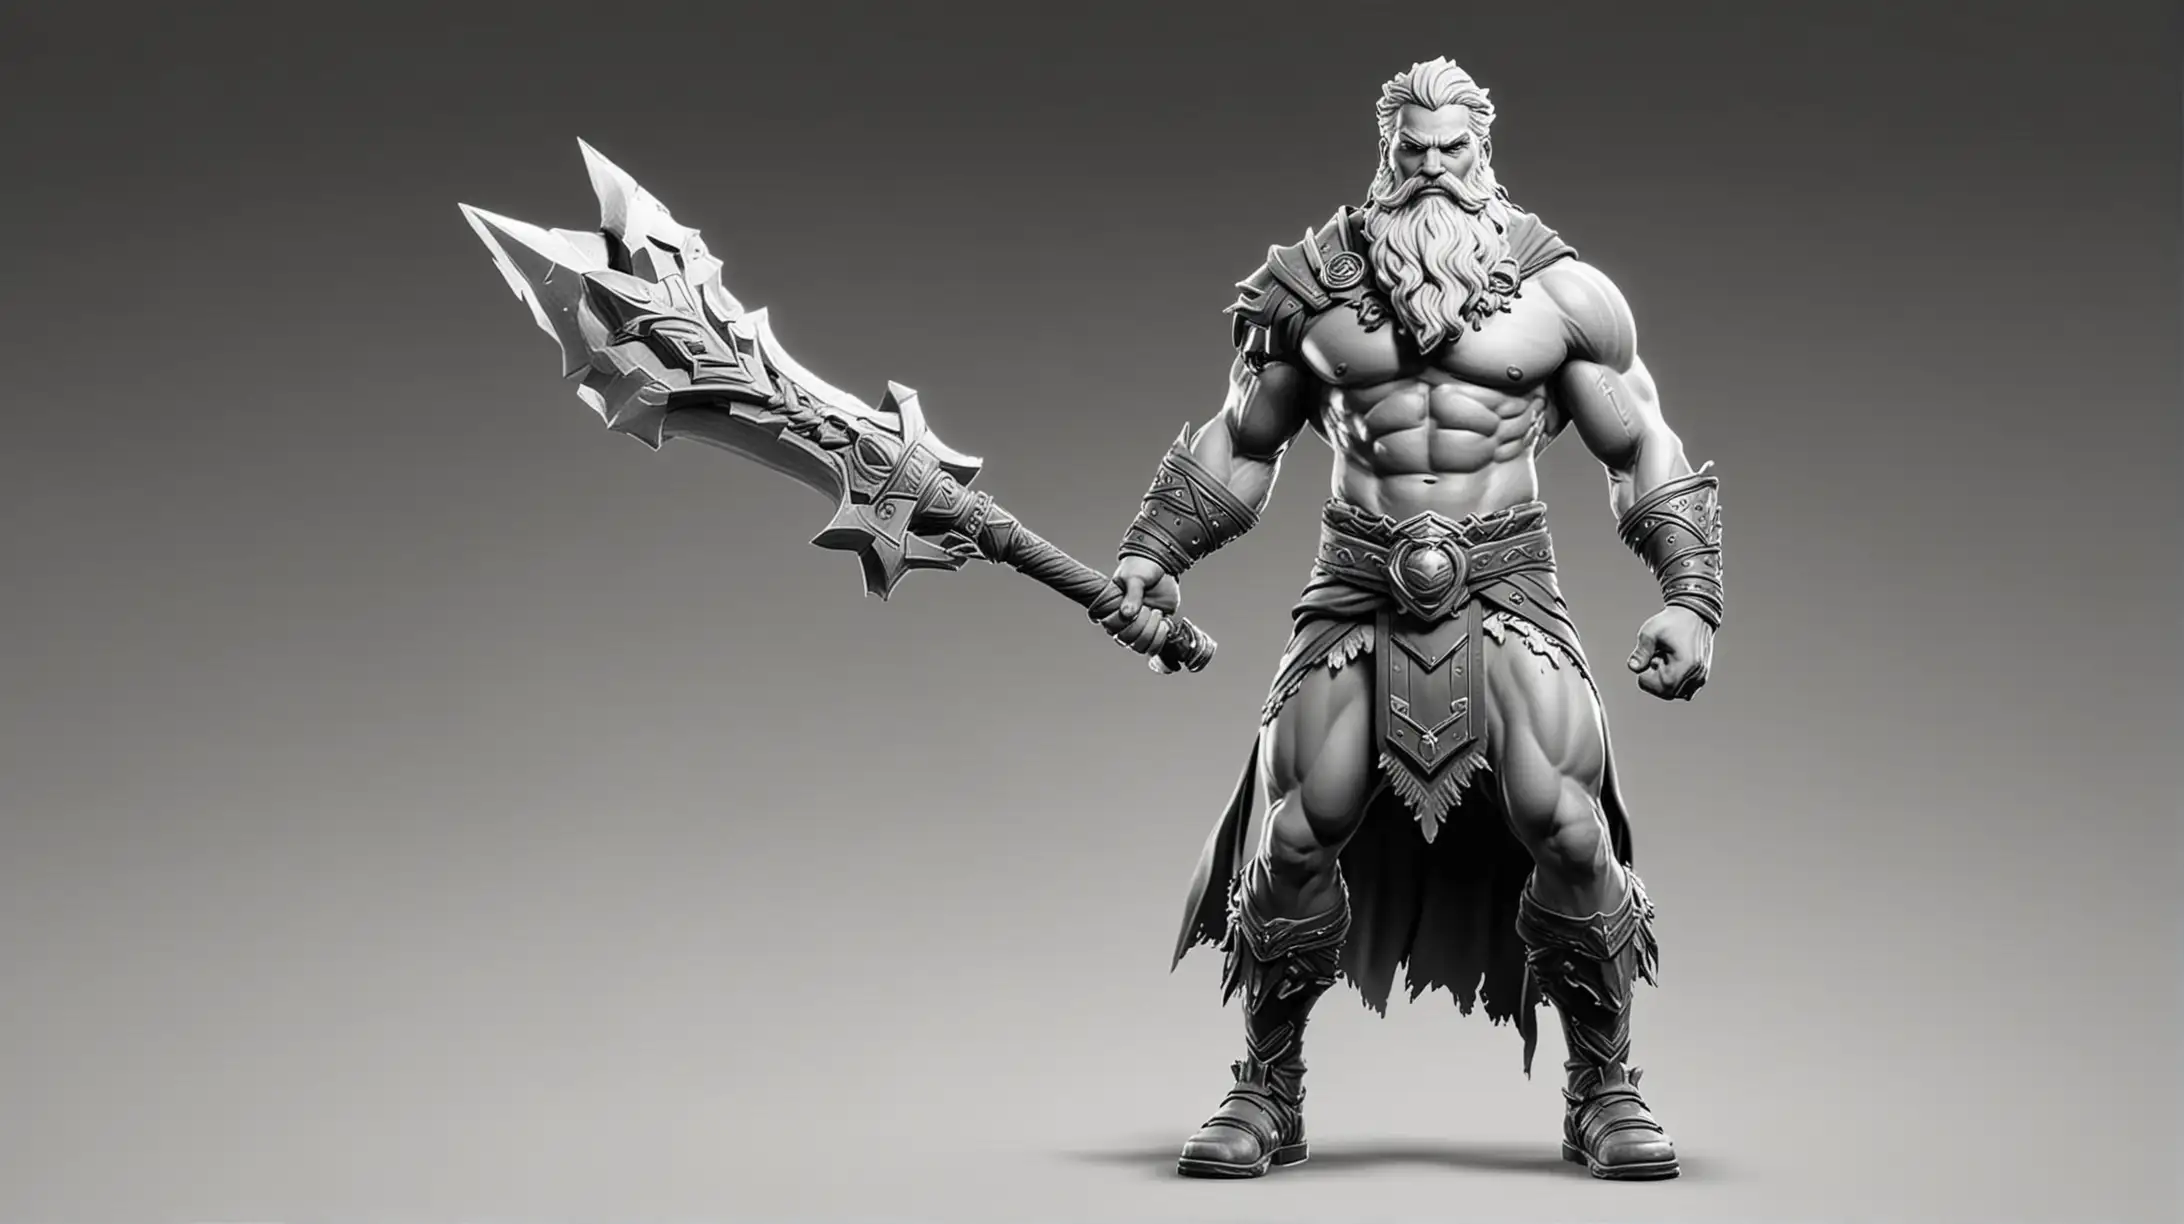 WHITE COLORING PAGES FORTNITE FULL BODY SKINS OF ZEUS IN FIGHTING STANCE, WITH LONG BEARD, NO WEAPON
